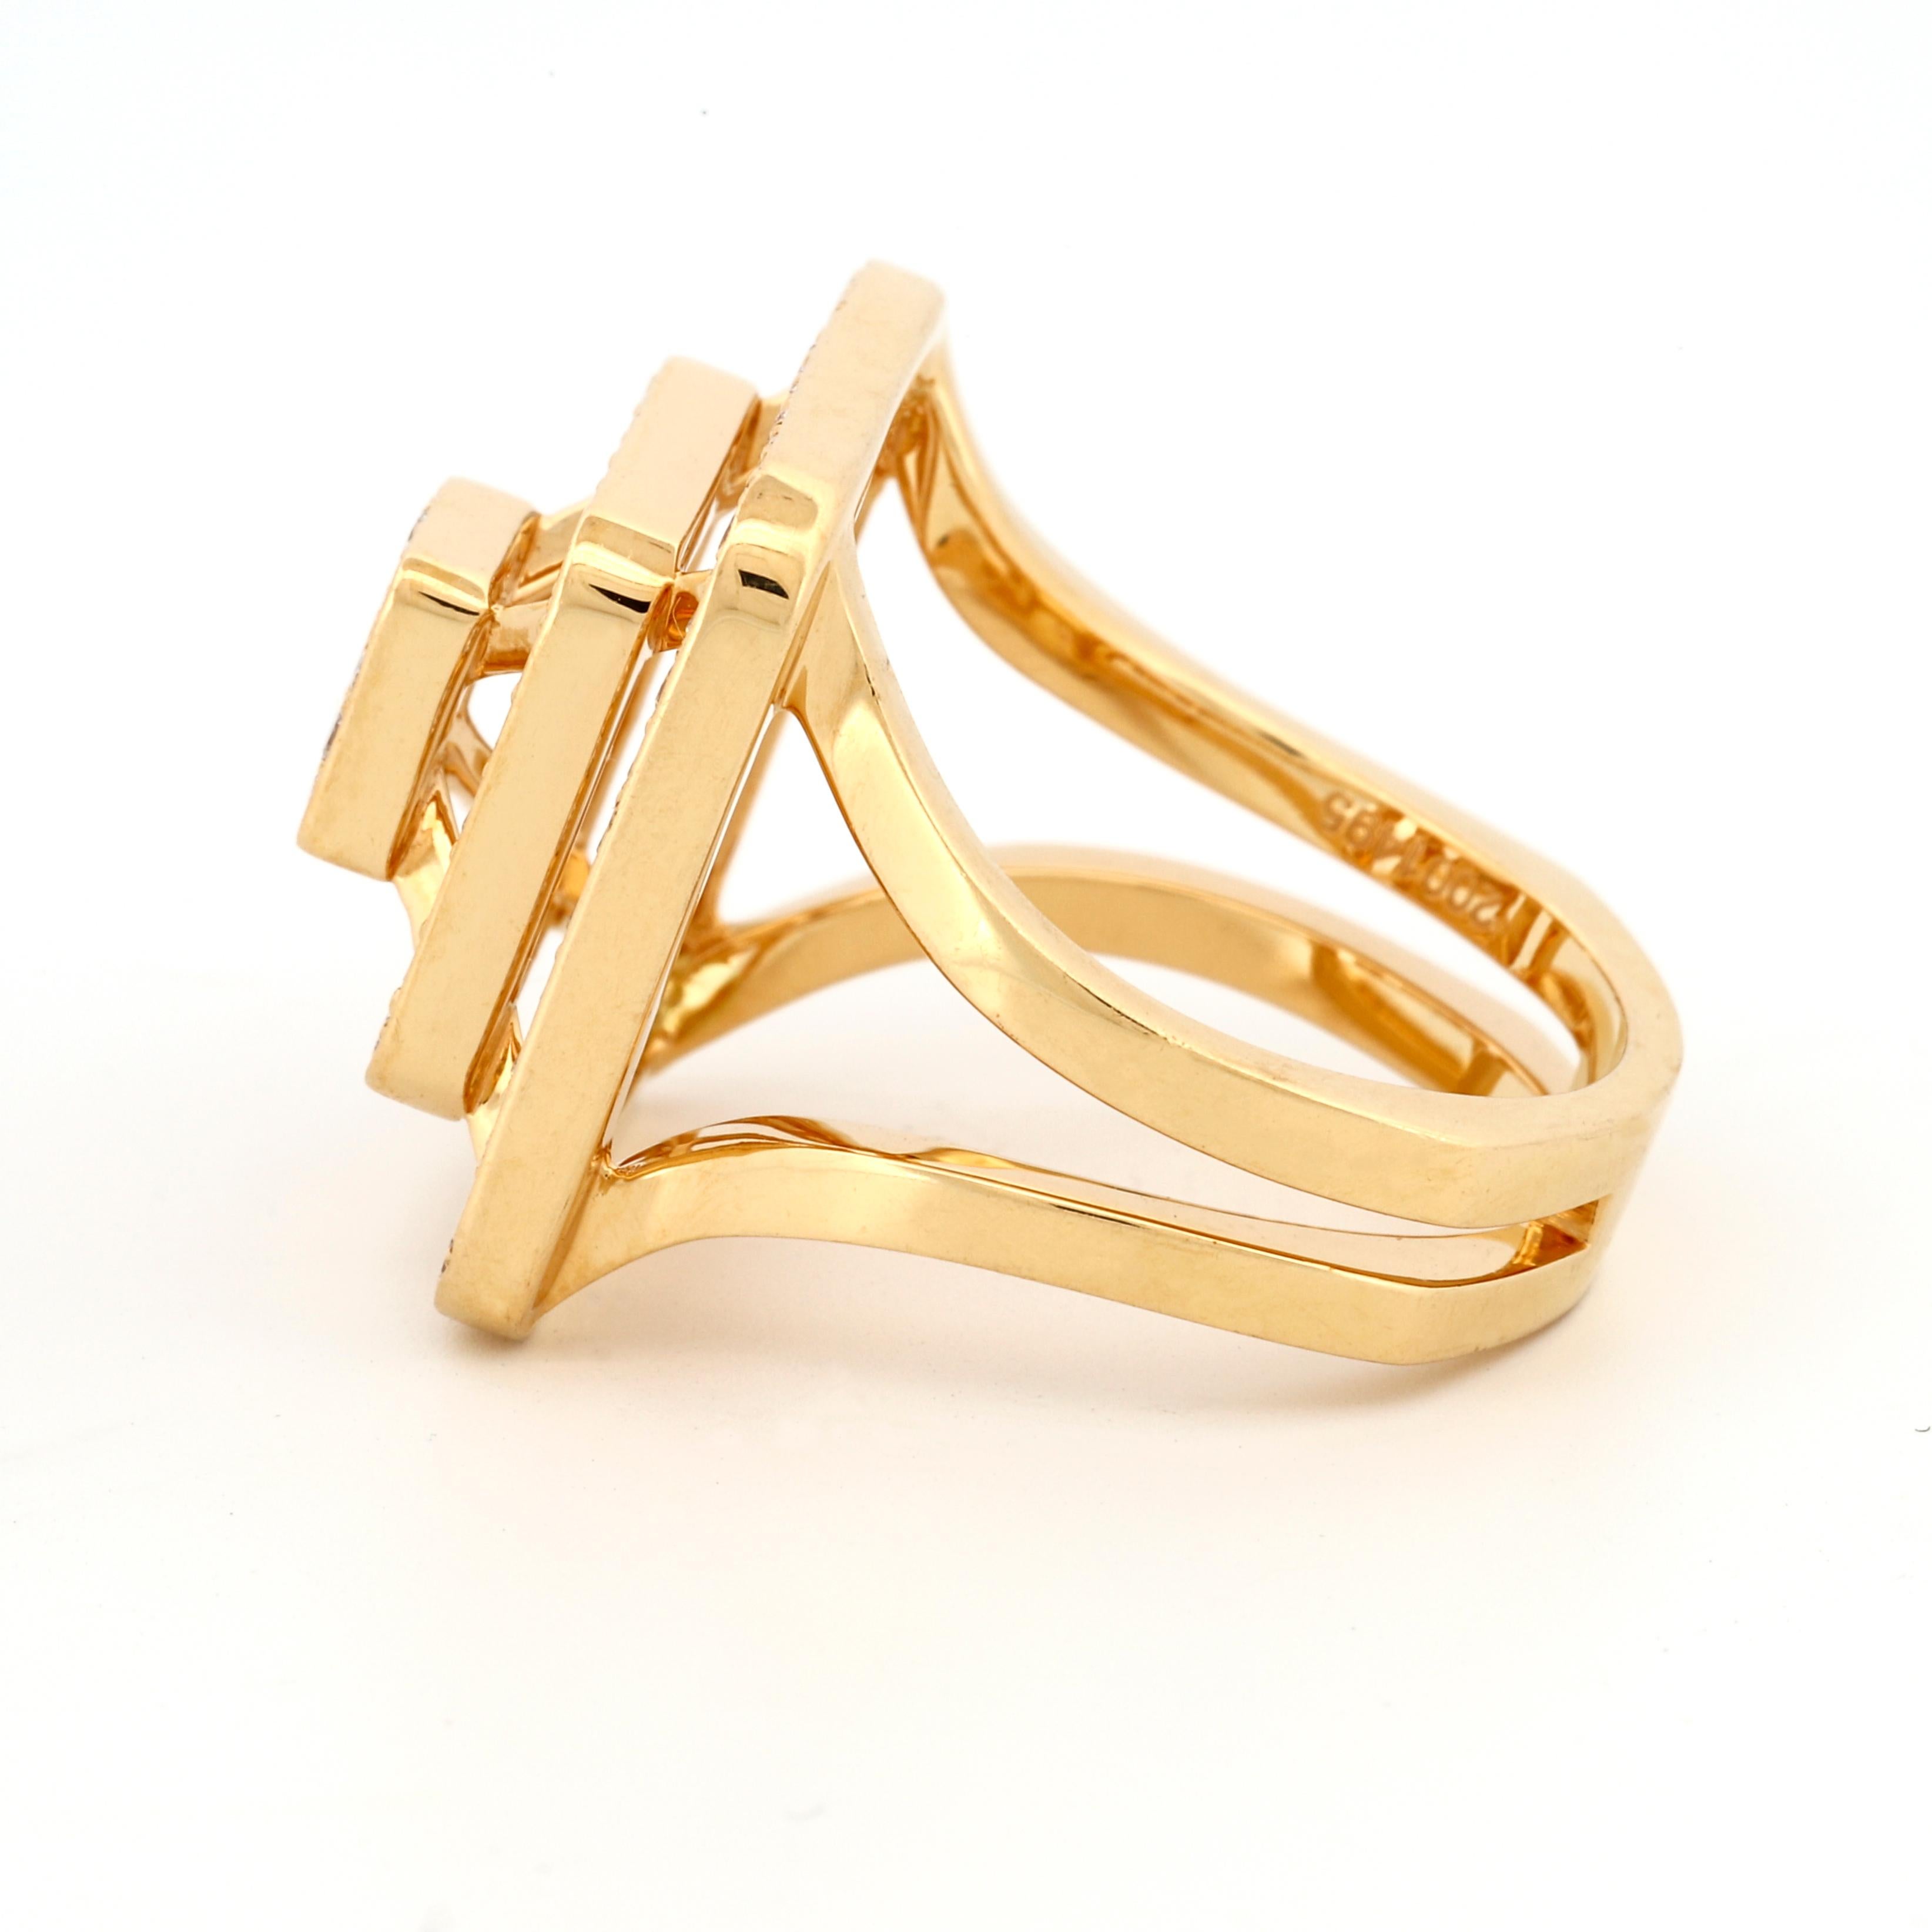 Modern Mimi So Piece Pyramid Diamond Ring in 18k Yellow Gold Size 6.5 For Sale